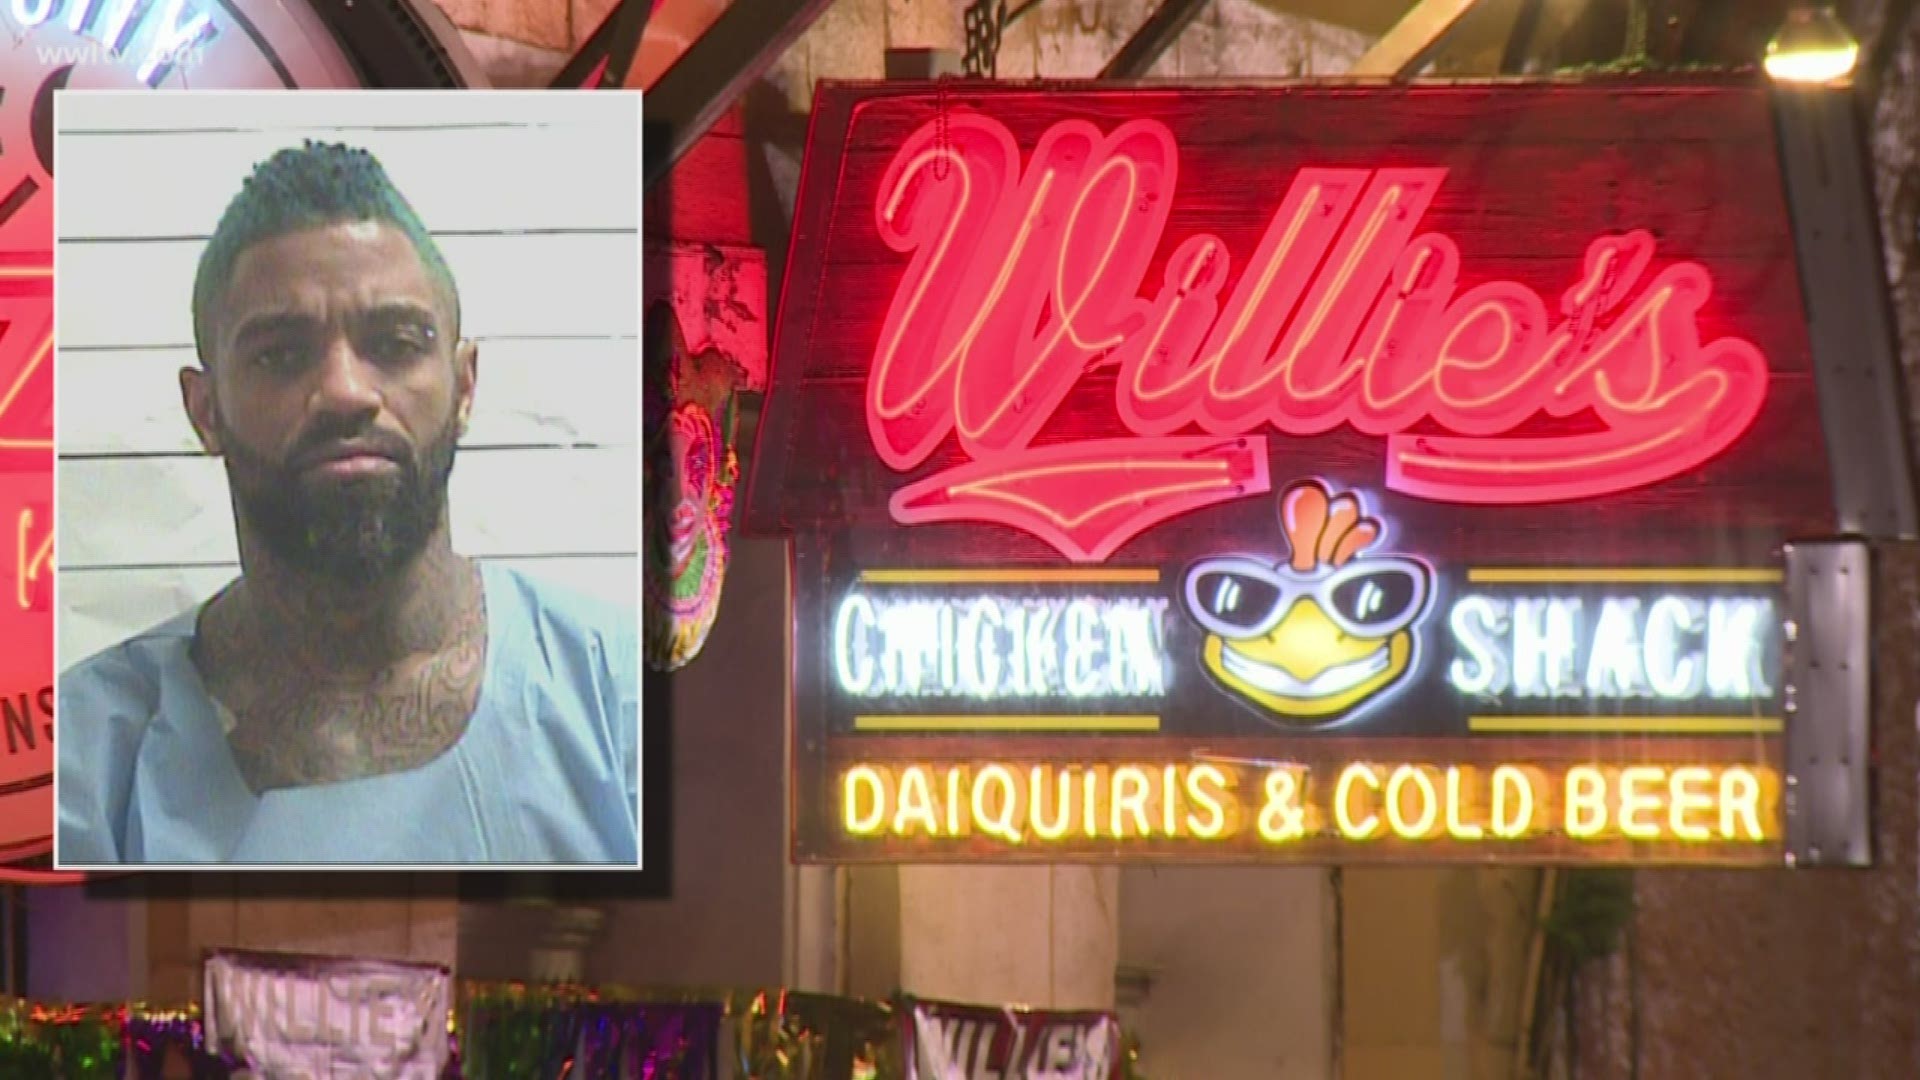 Police say the man grabbed the security guard's gun during a struggle inside a Willie's Chicken Shack restaurant on Bourbon Street.